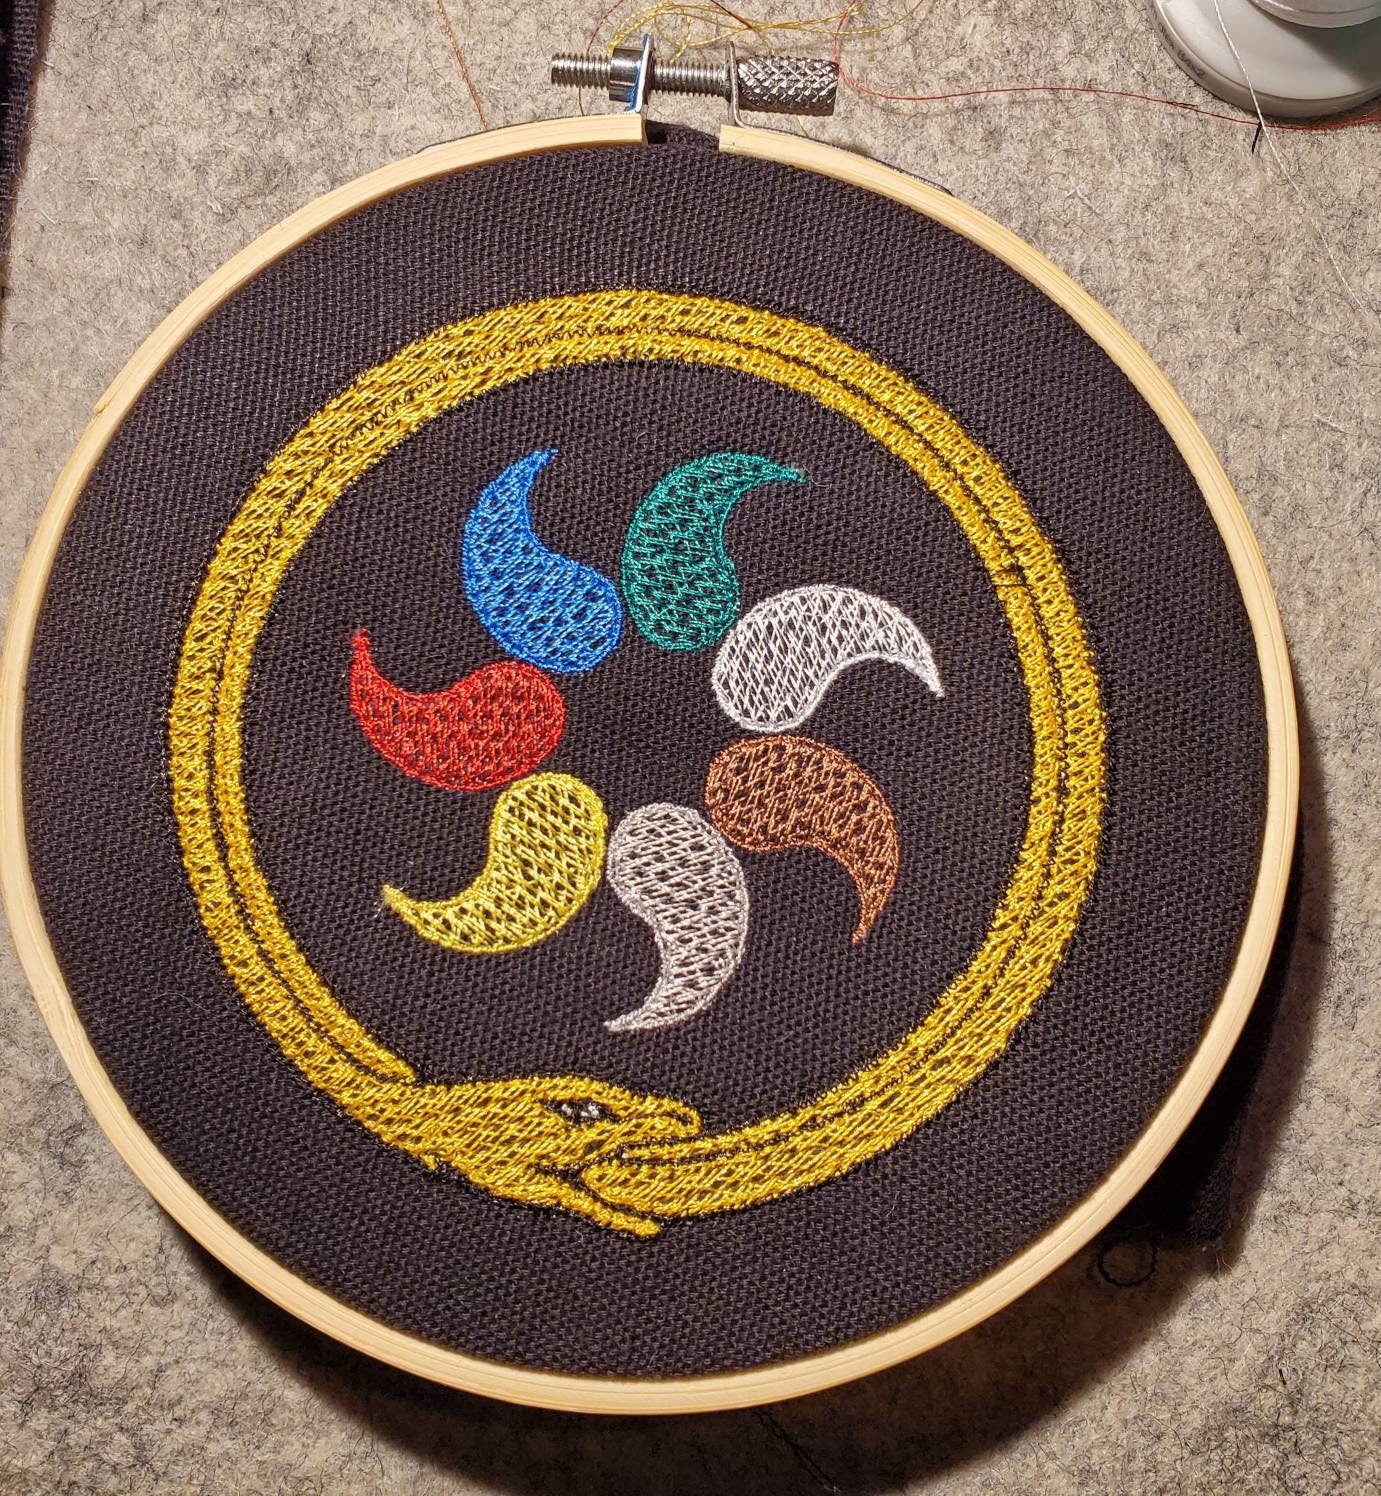 Aes Sedai Flame of Tar Valon Great Serpent Embroidery Hoop Wheel Deocoration. Wheel of Time inspired Multiple Options are available!